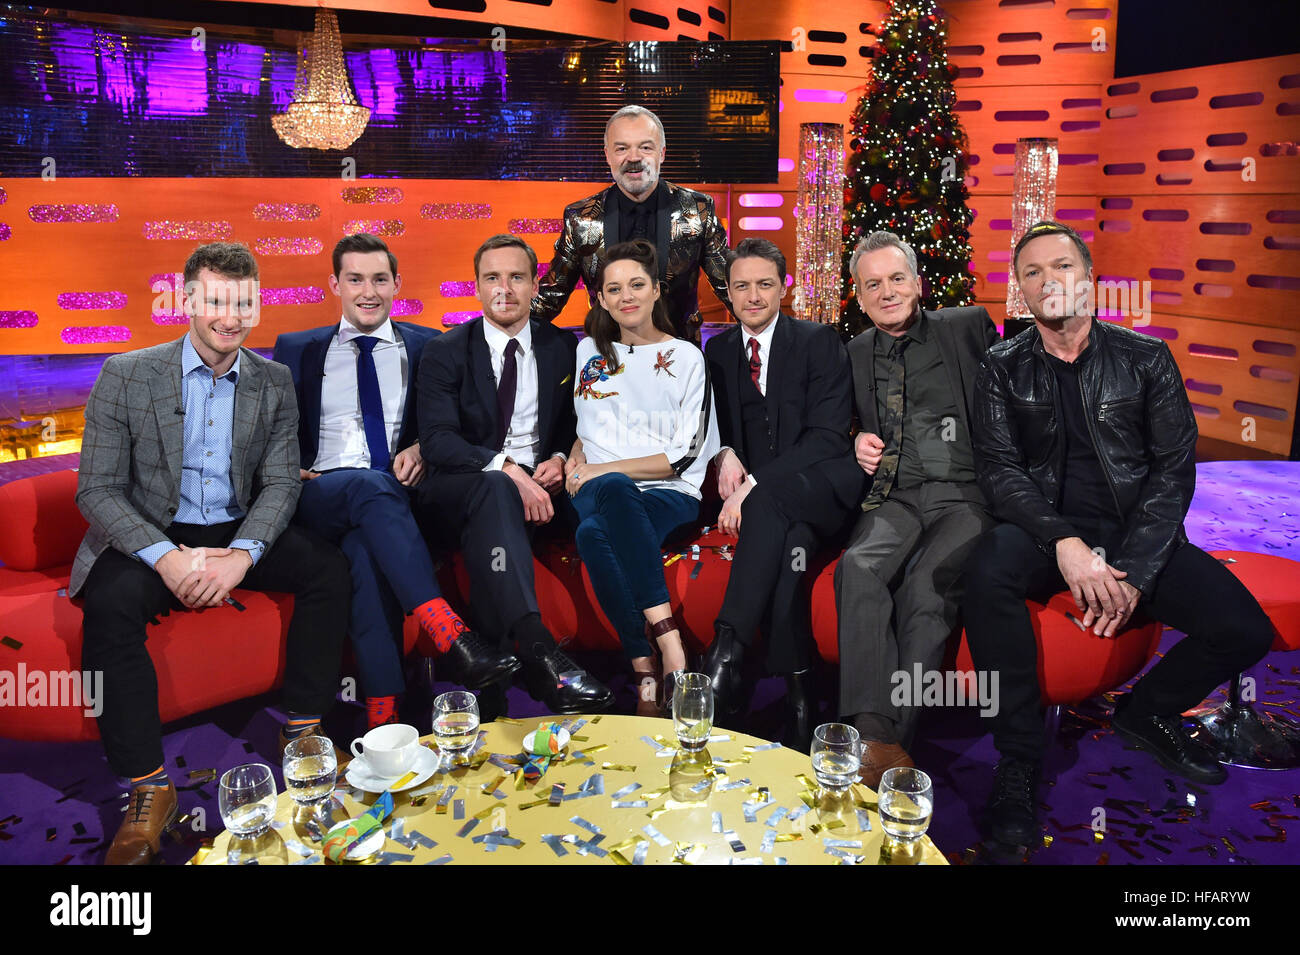 Host Graham Norton (back row) with (left to right front row ) Gary O'Donovan, Paul O'Donovan, Michael Fassbender, Marion Cotillard, James McAvoy, Frank Skinner and Pete Tong during filming of the Graham Norton Show at The London Studios, south London, to be aired on BBC One on New Year's Eve. Stock Photo